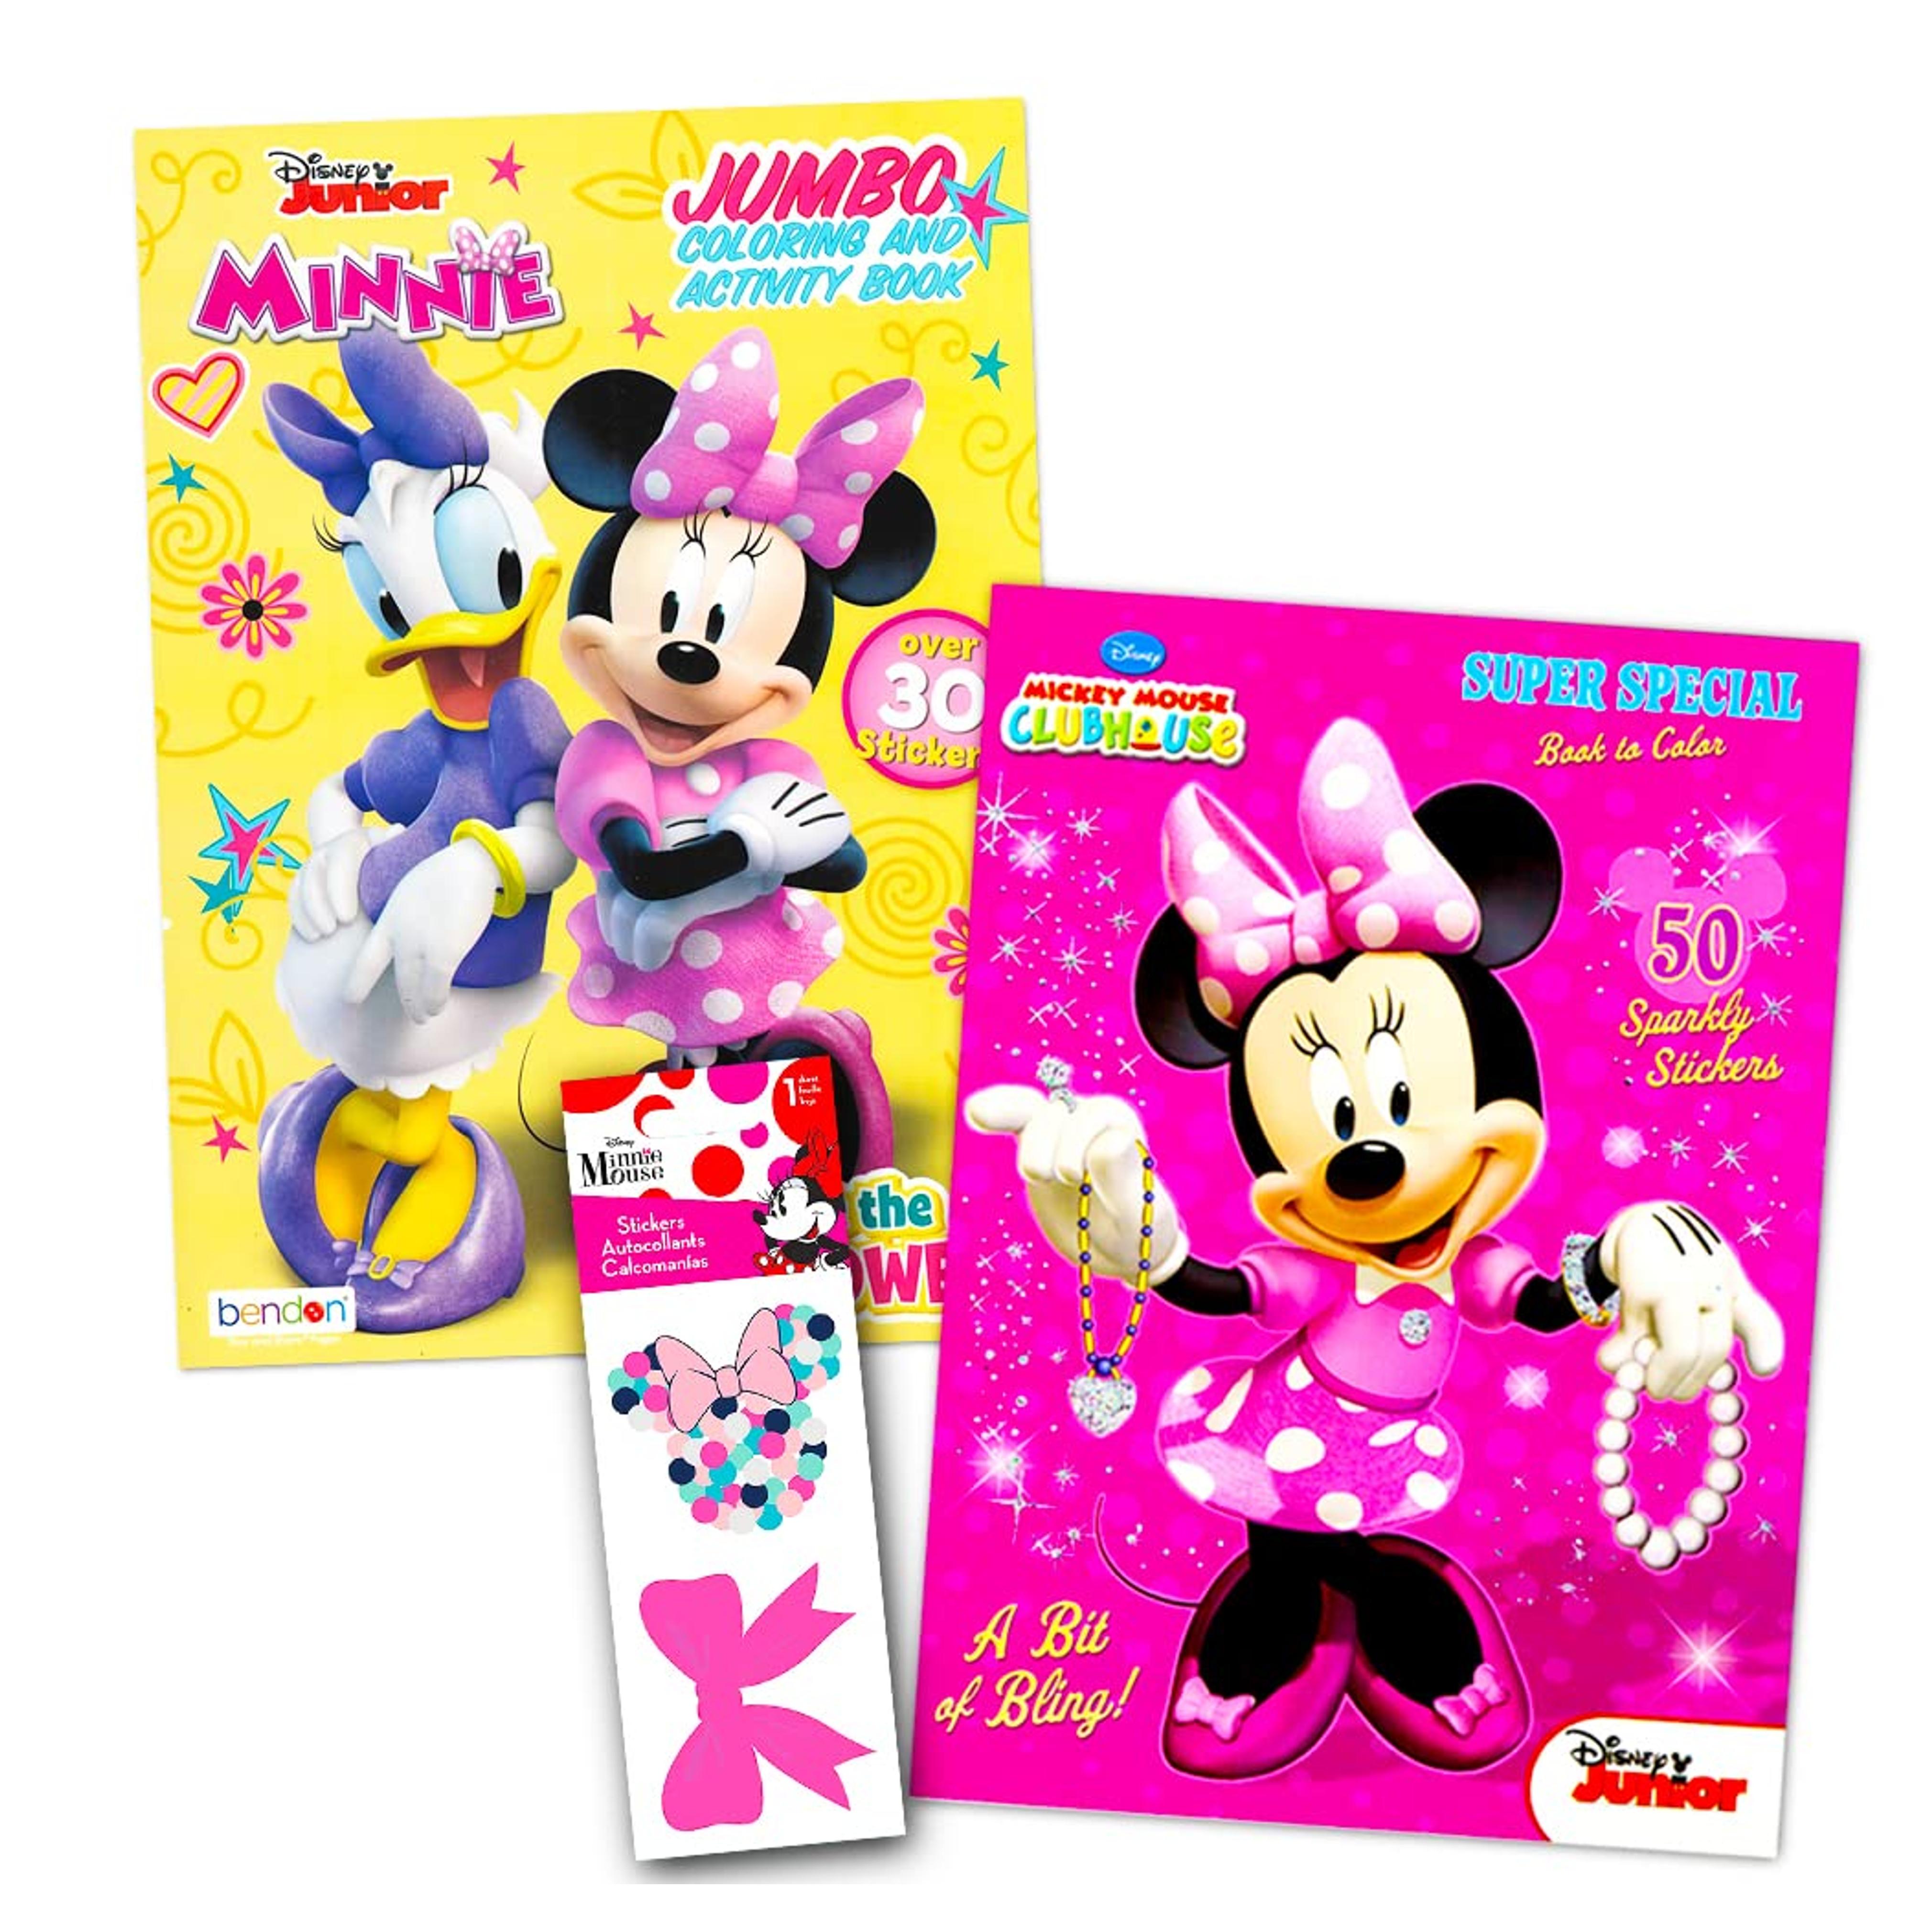 Disney Minnie Mouse Coloring Book Set with Stickers -- 2 Deluxe Coloring Books and over 150 Stickers